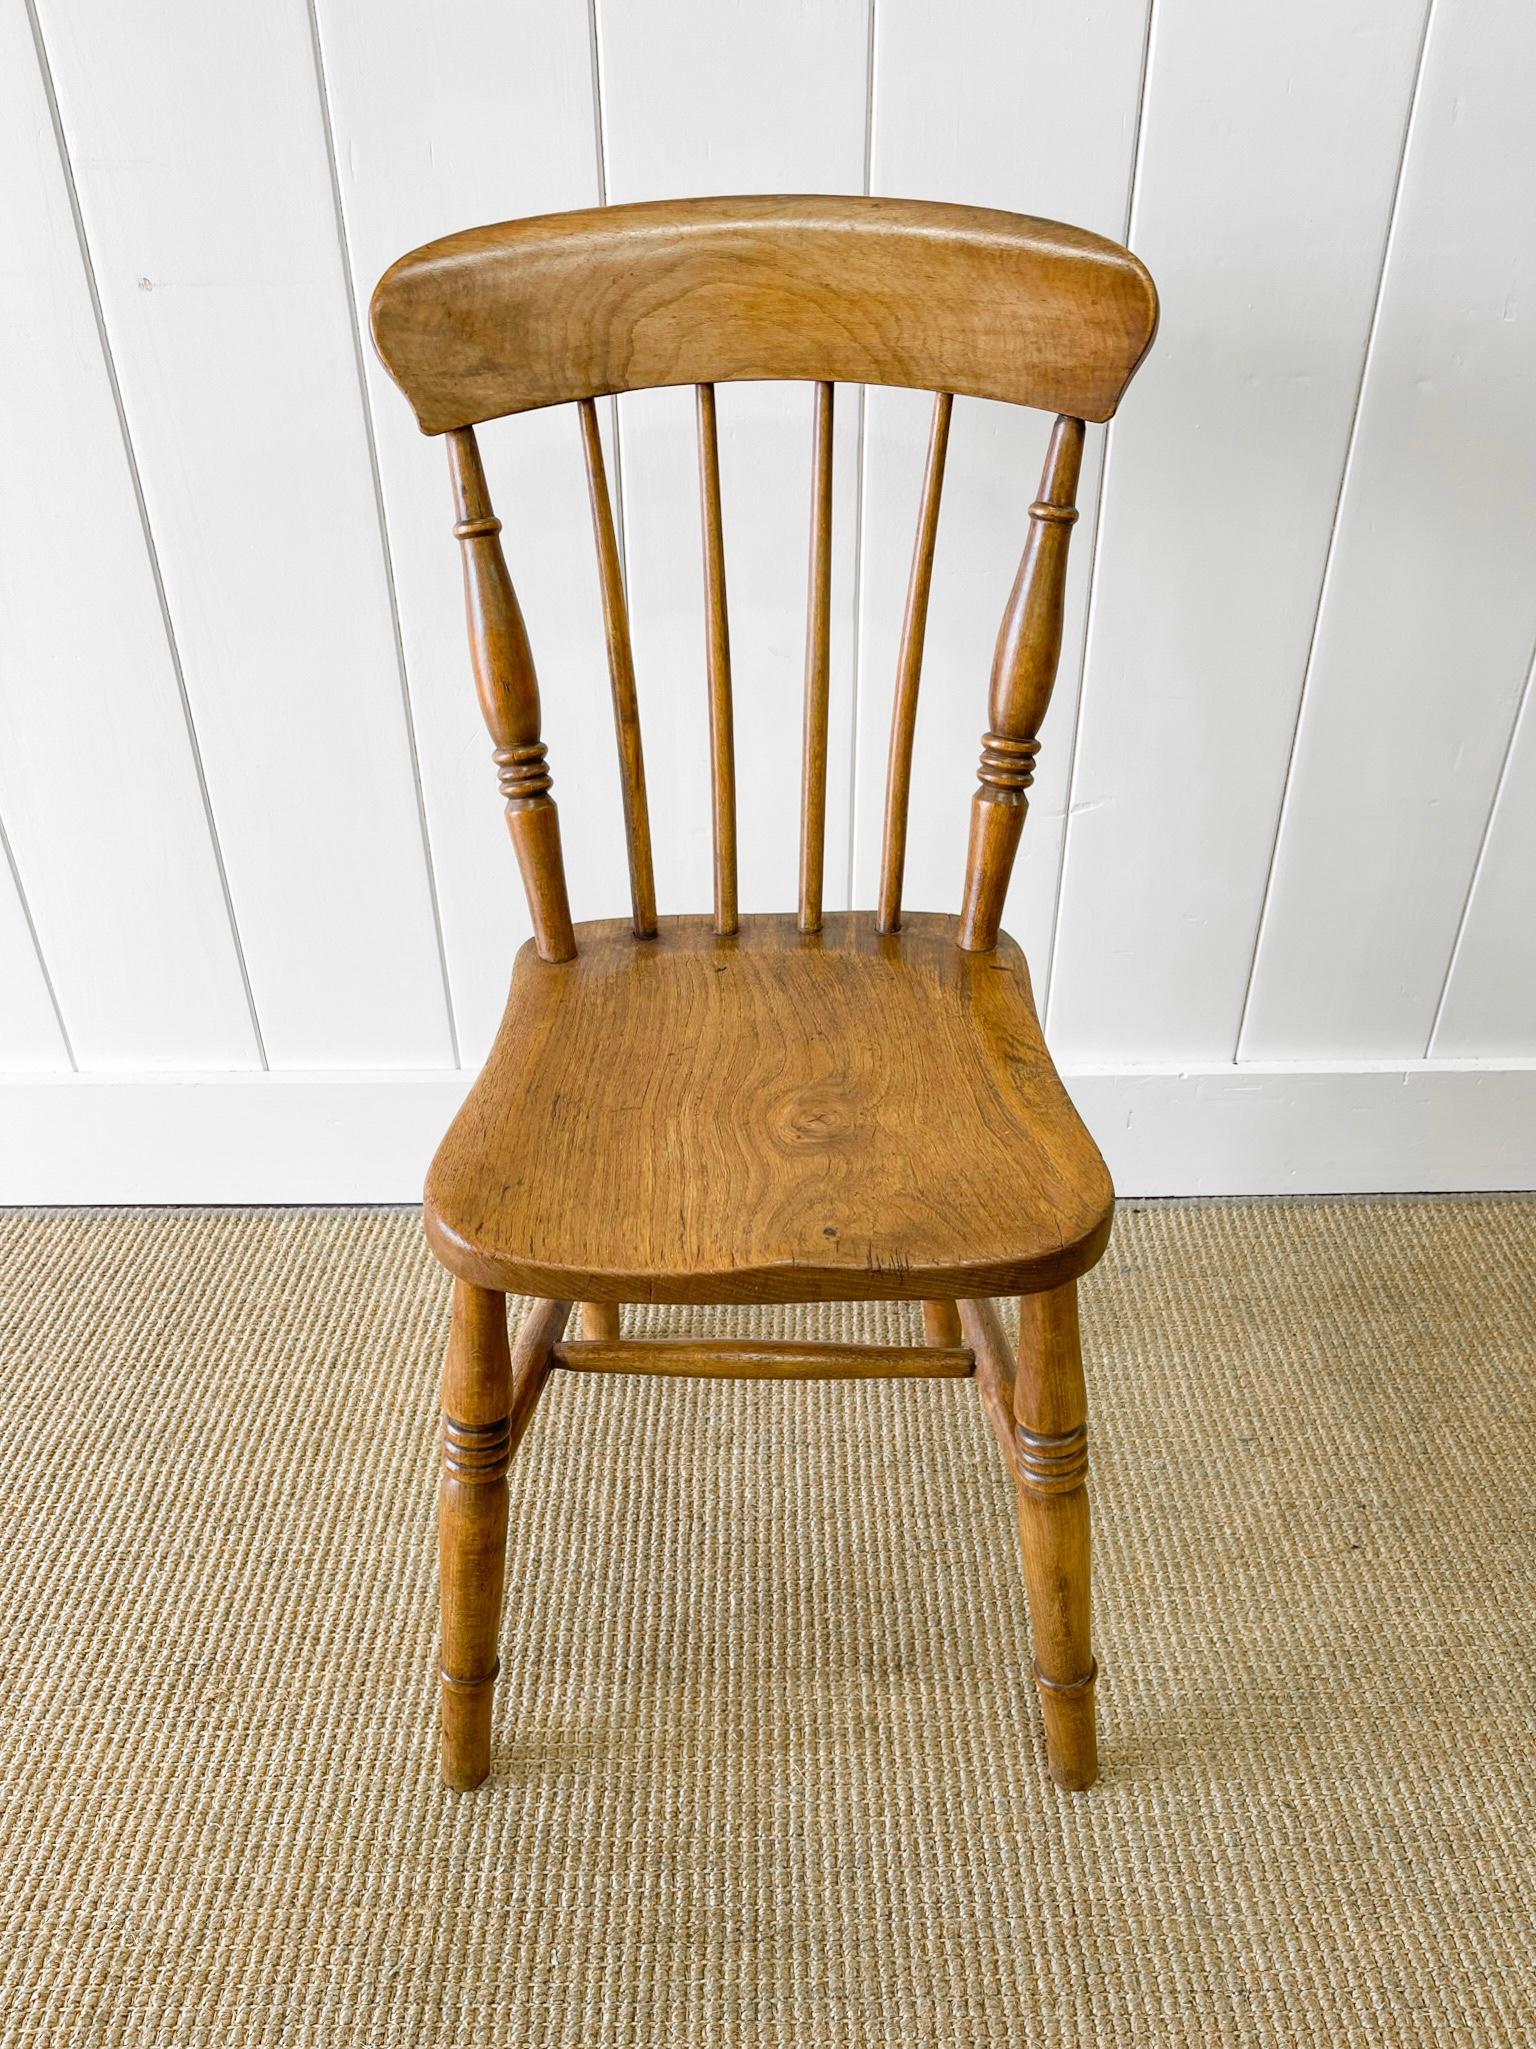 Ash An Antique Set of 4 Early 19th Century Stick Back Chairs For Sale